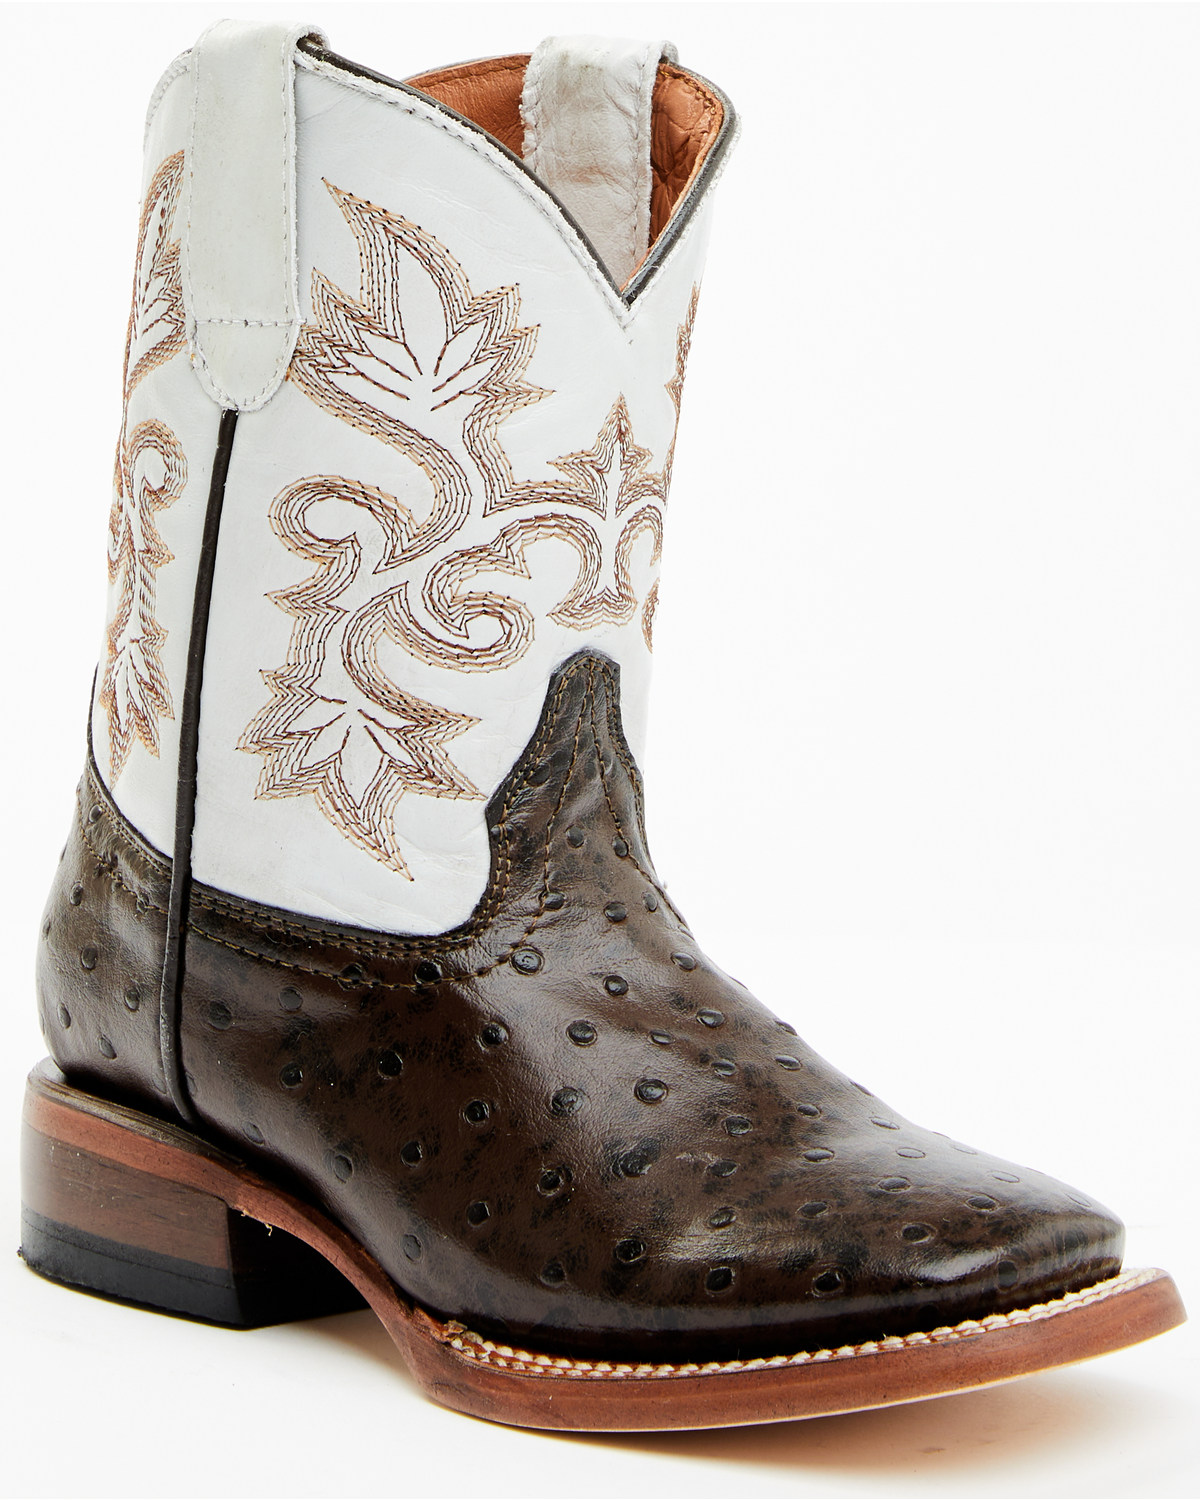 Tanner Mark Boys' Ostrich Print Western Boots - Broad Square Toe